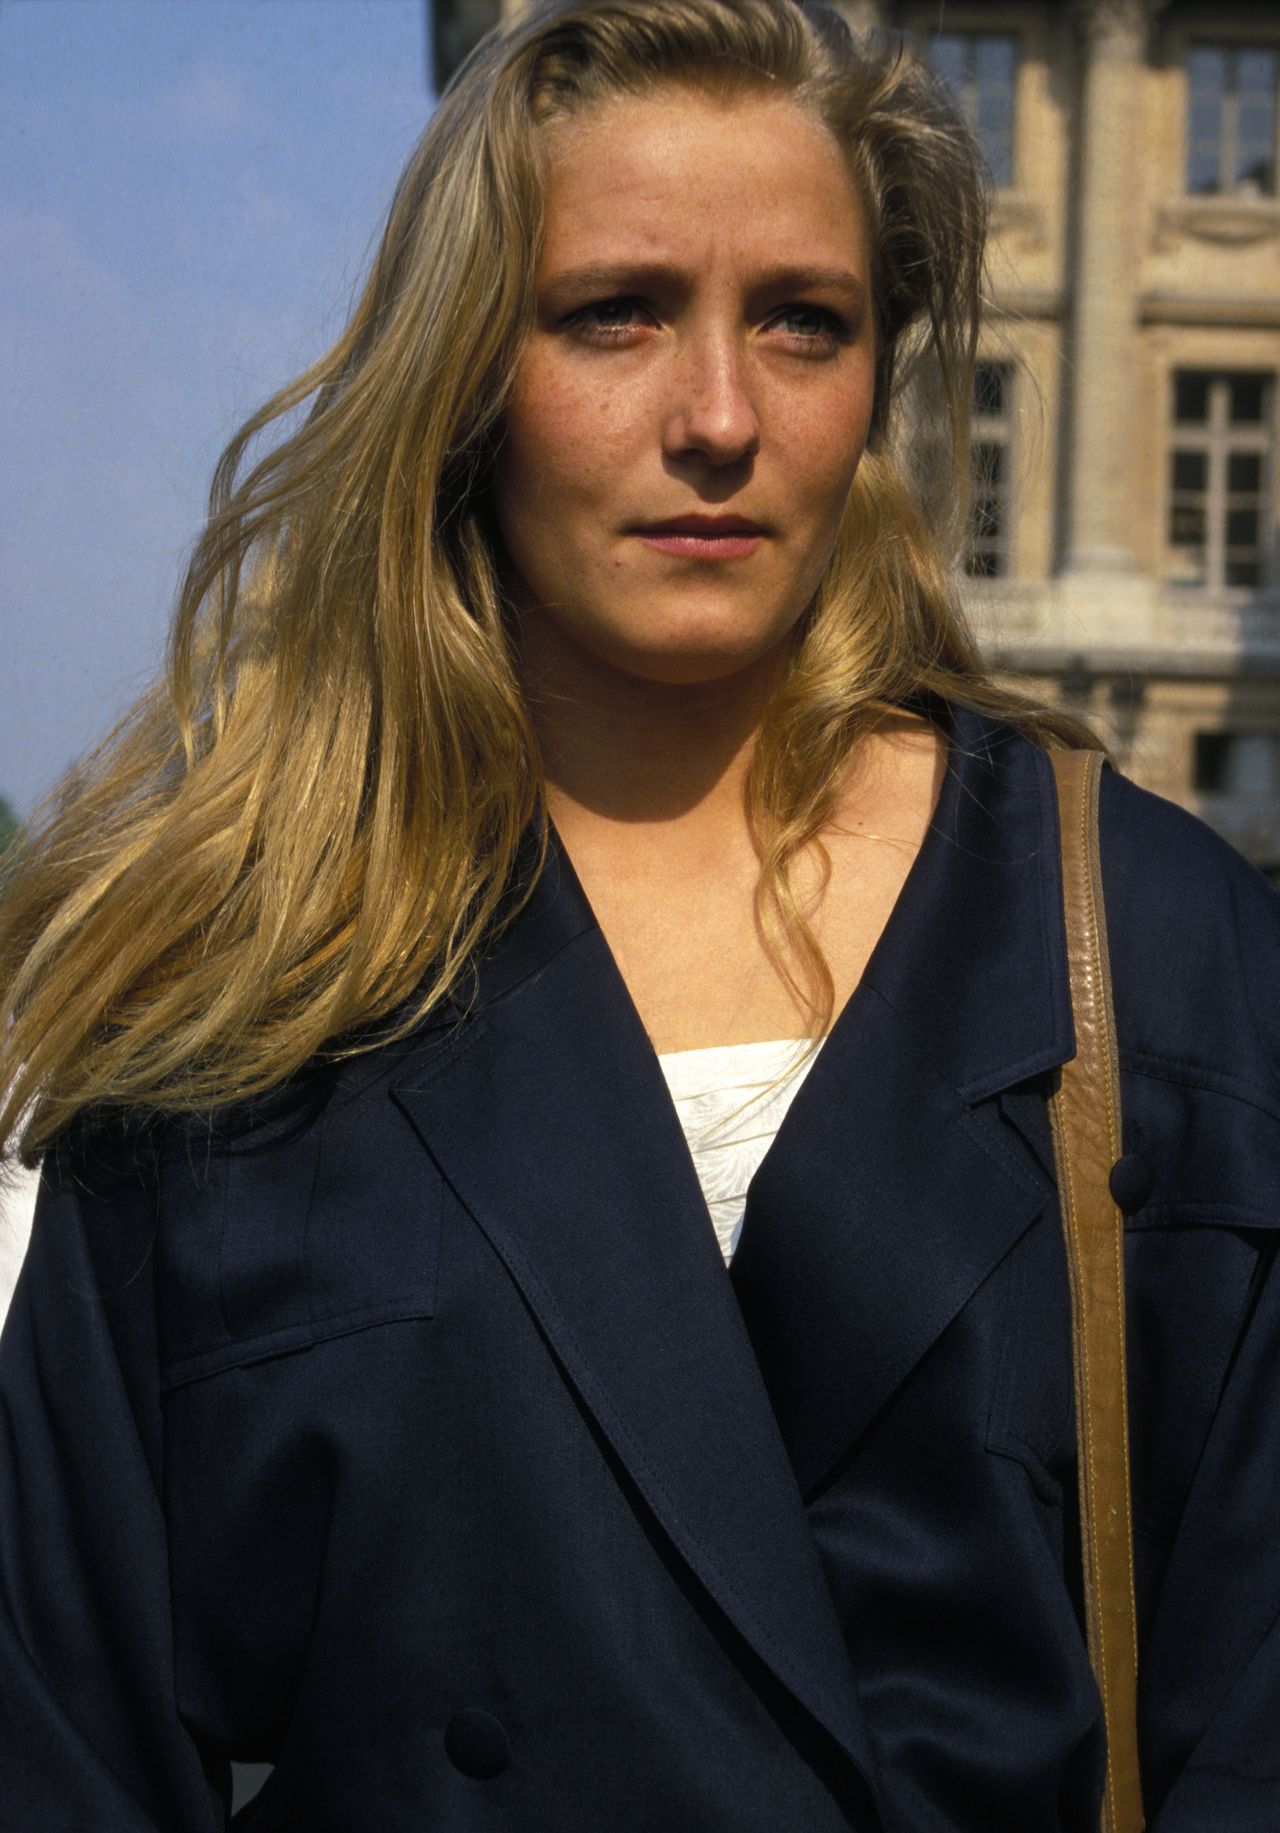 Marine Le Pen in May 1987. She was only 18 years old then.